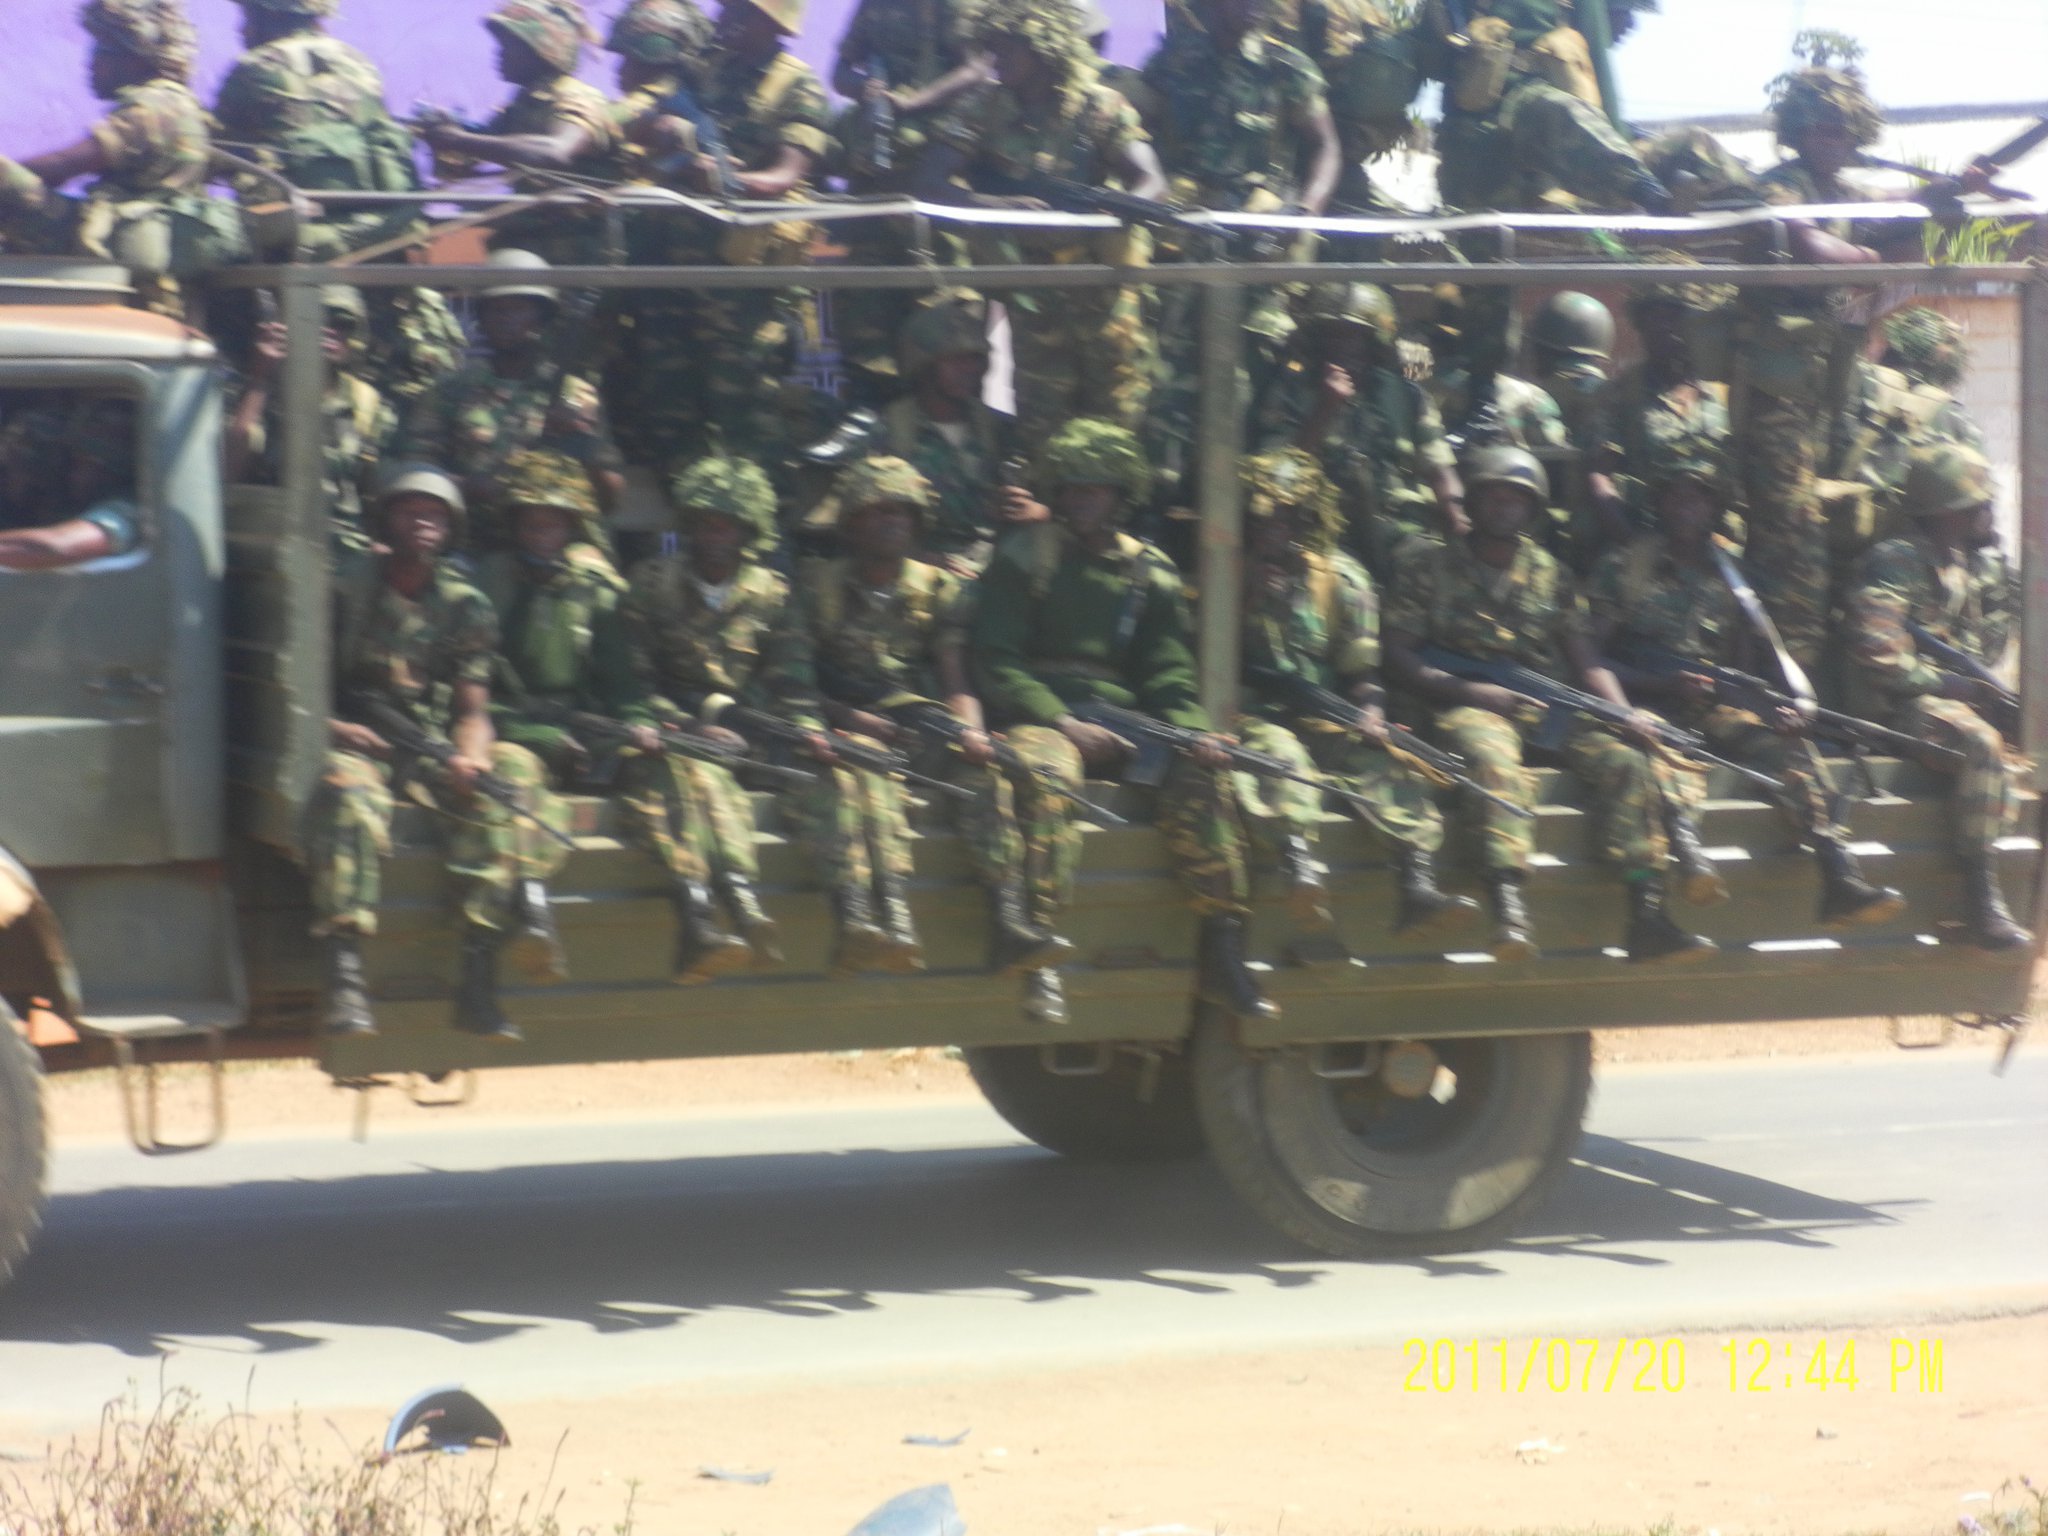 AFTERMATH OF THE MALAWI DEMONSTRATIONS ON 21st JULY 2011 AT 11.40am